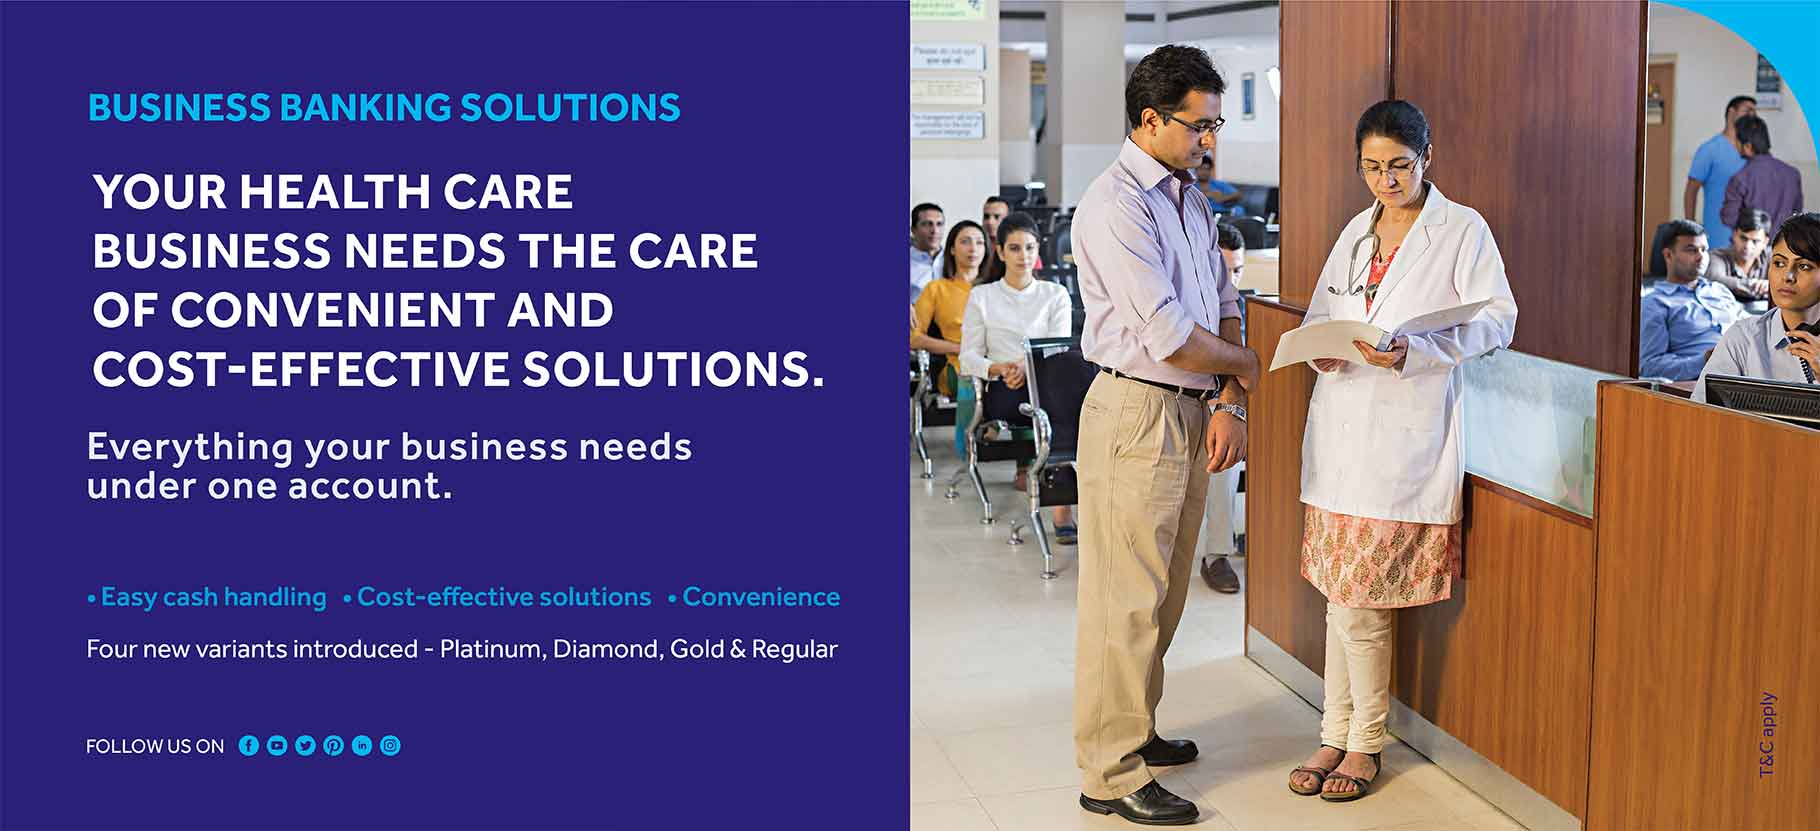 Your health care business needs the care of convenient and cost-effective solutions